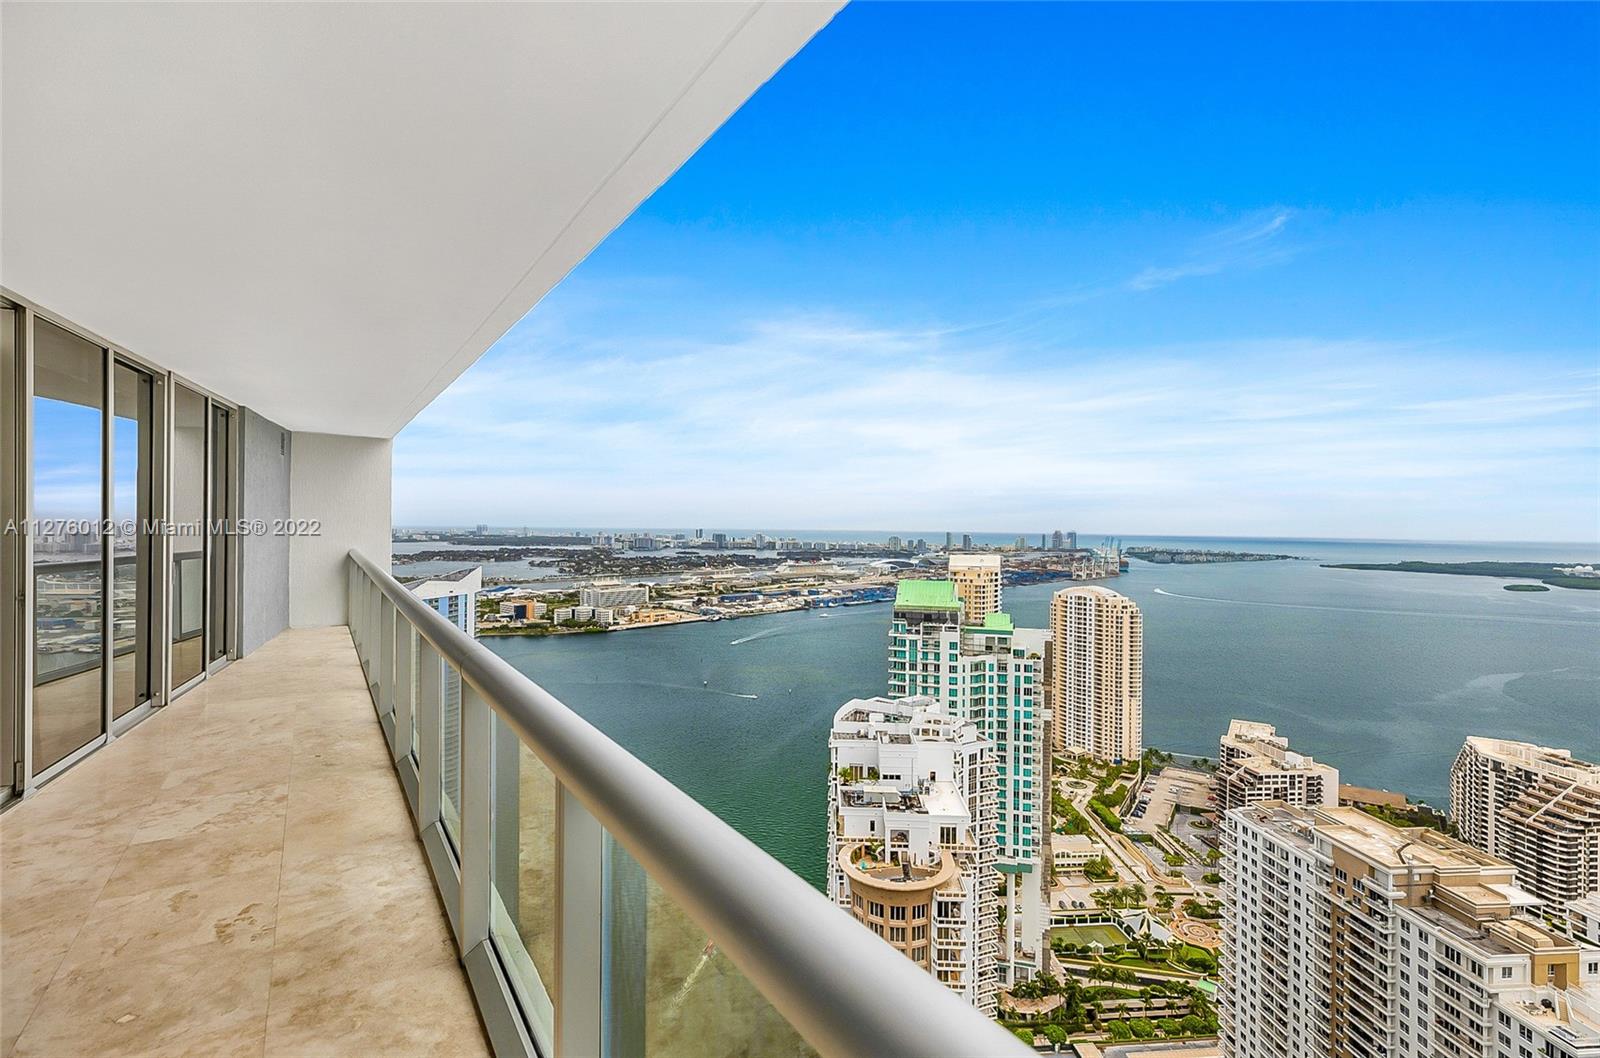 Breathtaking views of Biscayne Bay , Key Biscayne , Miami Beach  , Biscayne Islands and Miami skyline from  this 2 bed plus den / 2 bath apartment on the 53rd floor at beautiful Icon Brickell Tower 1. Large balcony ,porcelain floors , granite countertops , top of the line fixtures and appliances. Icon Brickell is a 5 stars amenities building with the best spa in Miami . state of the art gym , spectacular pool area , high end restaurants and more. Centrally located close to Mary Brickell village and Brickell City Centre. A real jewel !